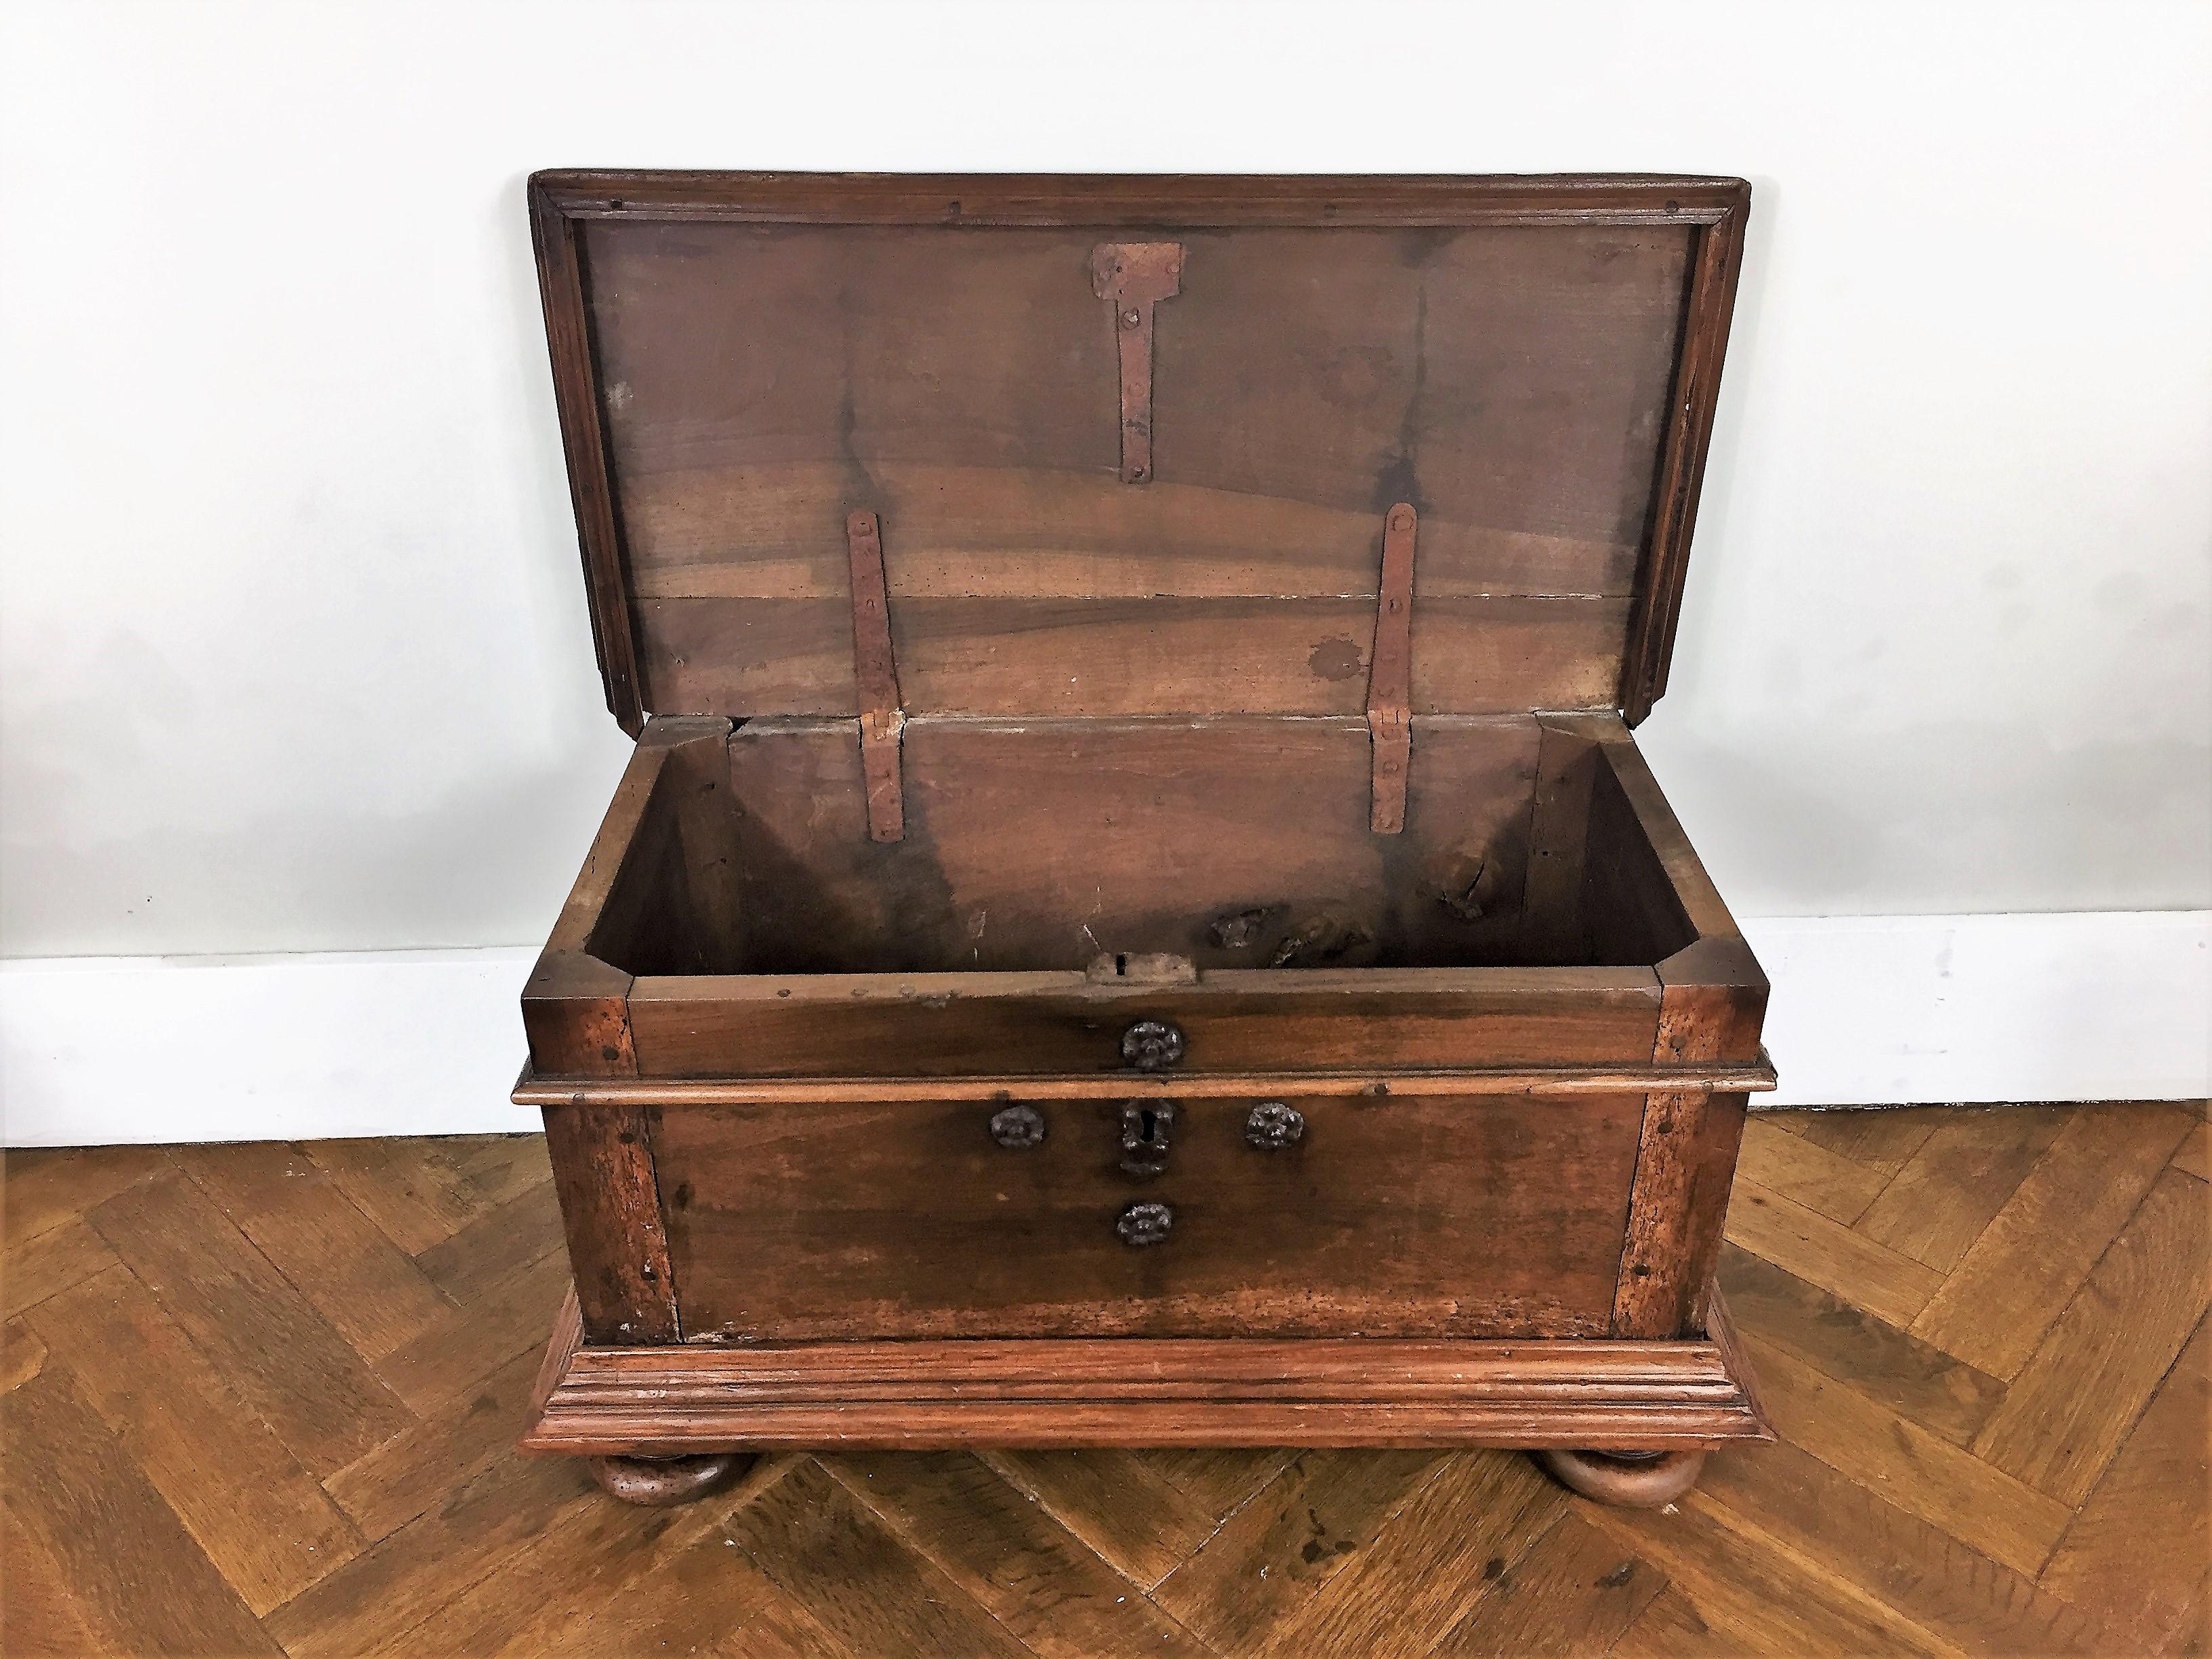 Forged 17th Century Chest with Wrought Iron Handles